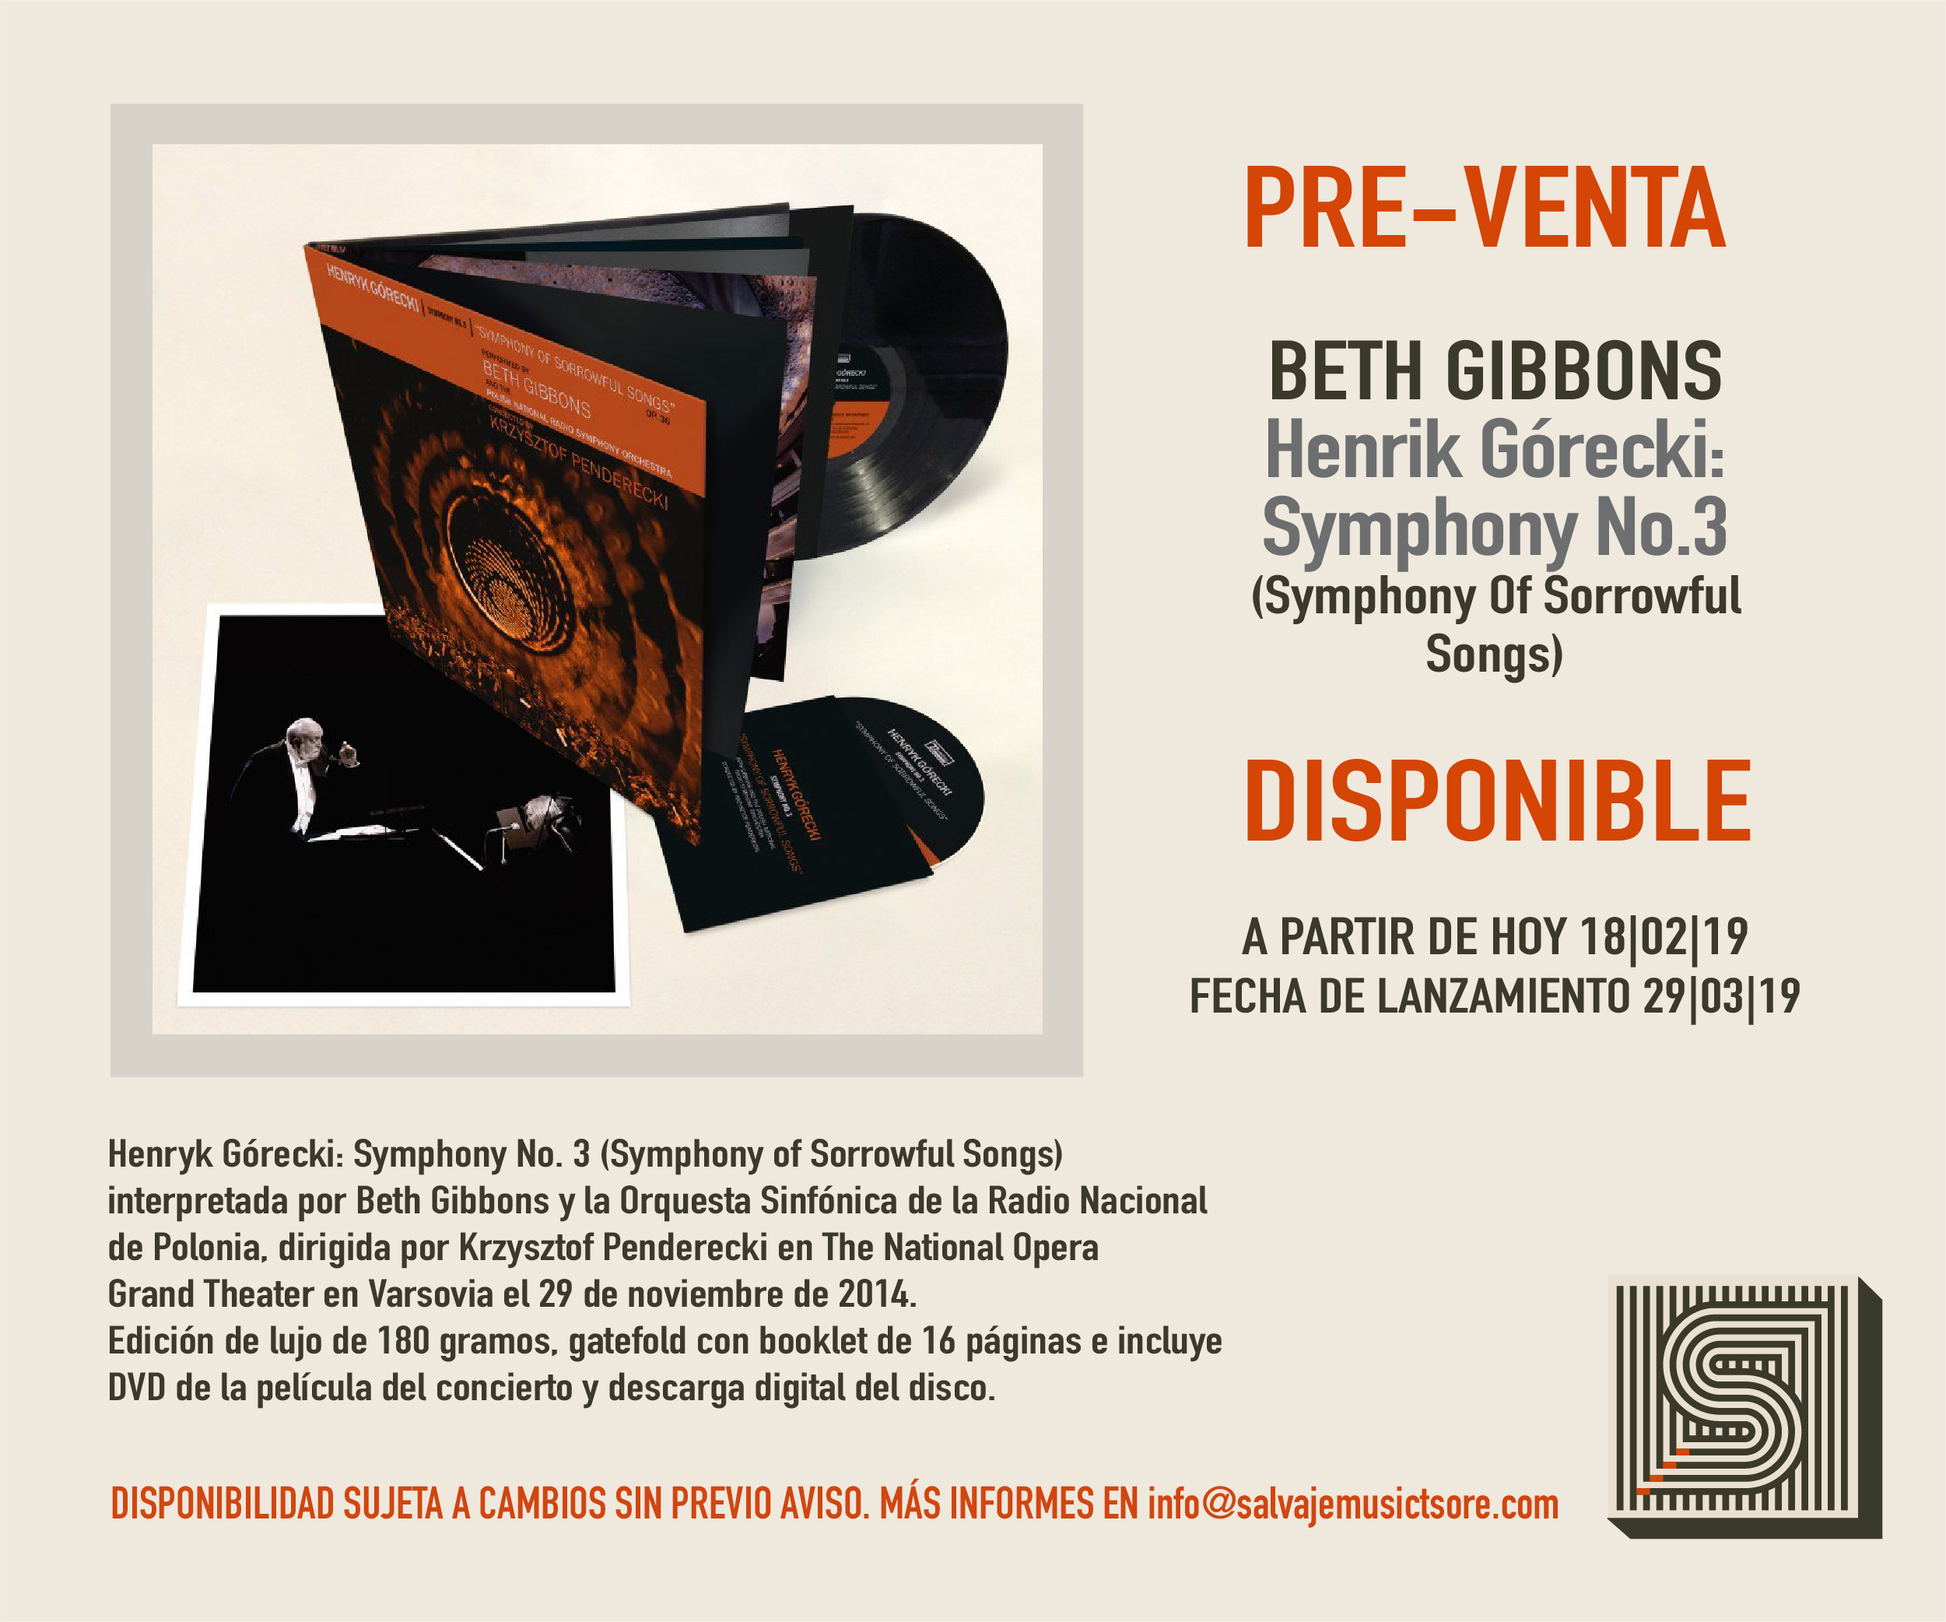 Beth Gibbons - Henryk Górecki: Symphony No. 3 (Symphony Of Sorrowful Songs) Deluxe Edition LP+DVD Vinil - Salvaje Music Store MEXICO